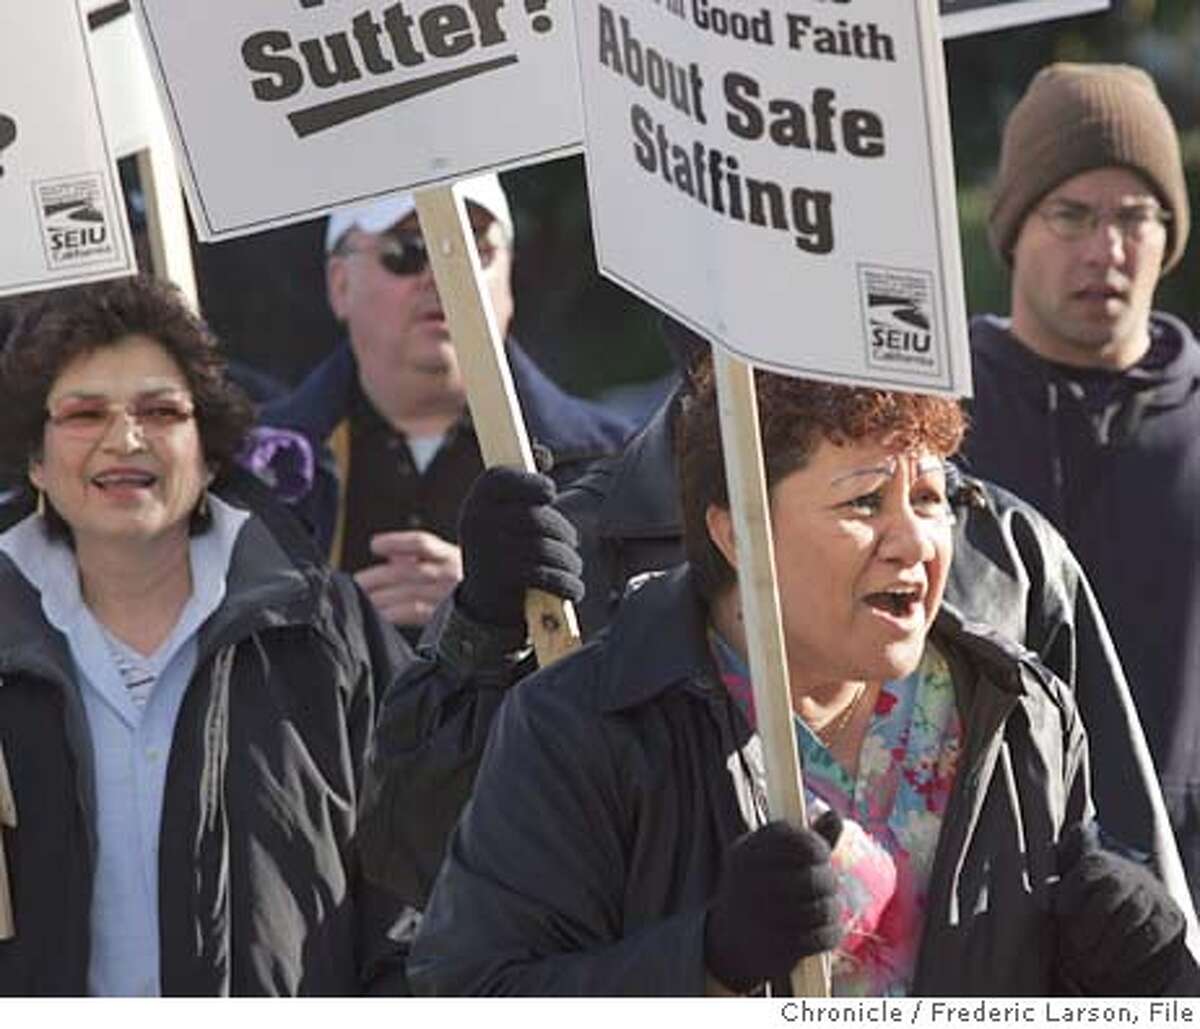 SUTTER_240_fl.jpg A one day strike on 12/1 bought about a lock-out for SEIU workers like Tine Mohi hospital staffer (right foreground) and member of local 250 (Healthcare Union) now finds herself walking the picket line with her brothers and sister in front of the entrance of Alta Bates Hospital in Berkeley.12/2/04 Berkeley CA Frederic Larson The San Francisco Chronicle Ran on: 12-03-2004 Workers picket outside Alta Bates hospital in Berkeley, where they were locked out after staging a one-day strike Wednesday. Ran on: 12-03-2004 Marwan Barghouti